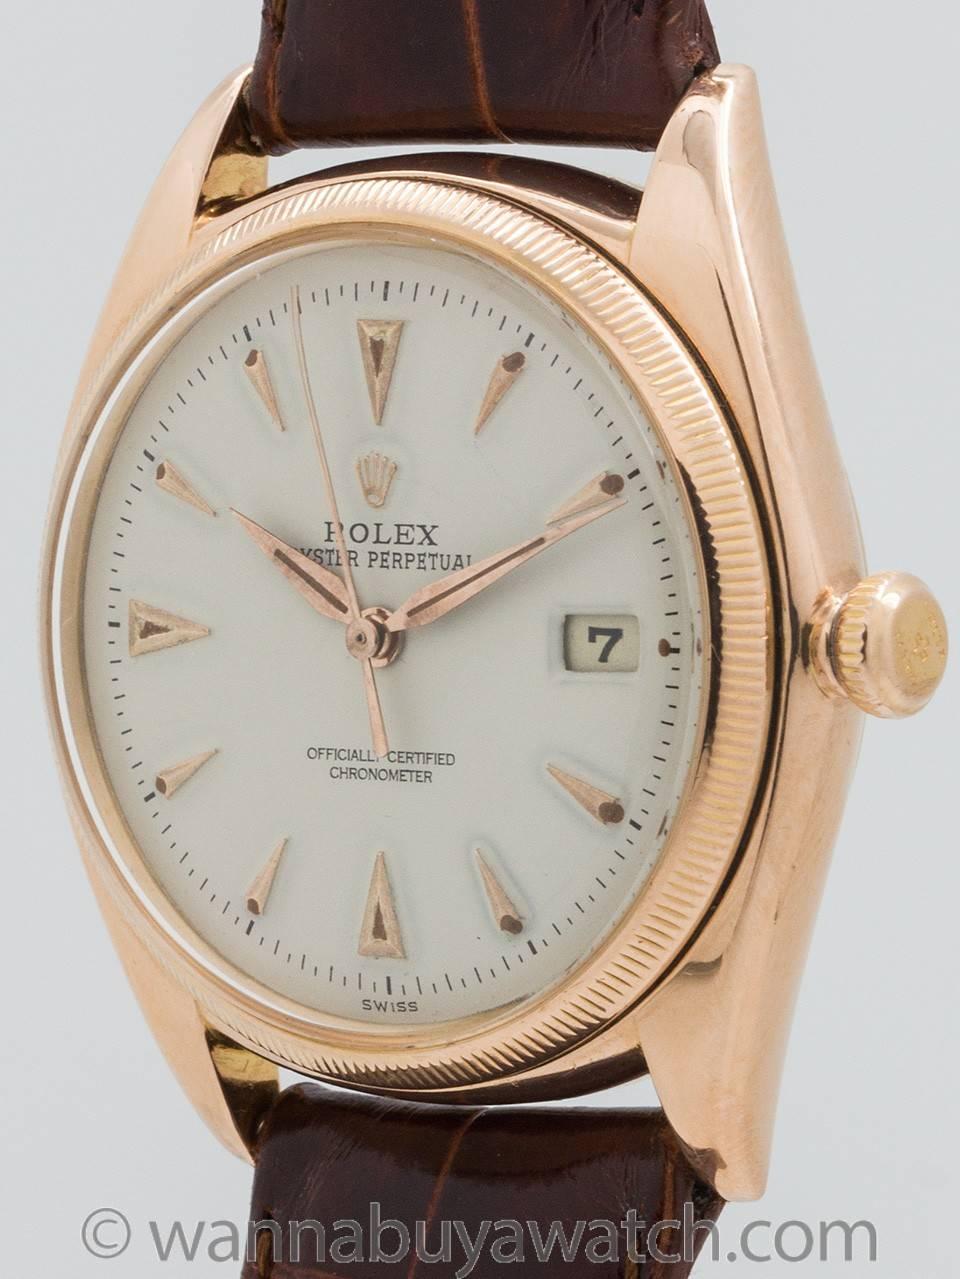 Vintage Rolex Datejust ref 4417 18K rose gold circa 1957. Featuring 36mm diameter case with 18K rose gold finely milled bezel. With acrylic crystal without cyclops date magnifier, and with nicely restored antique white dial with pink applied dagger